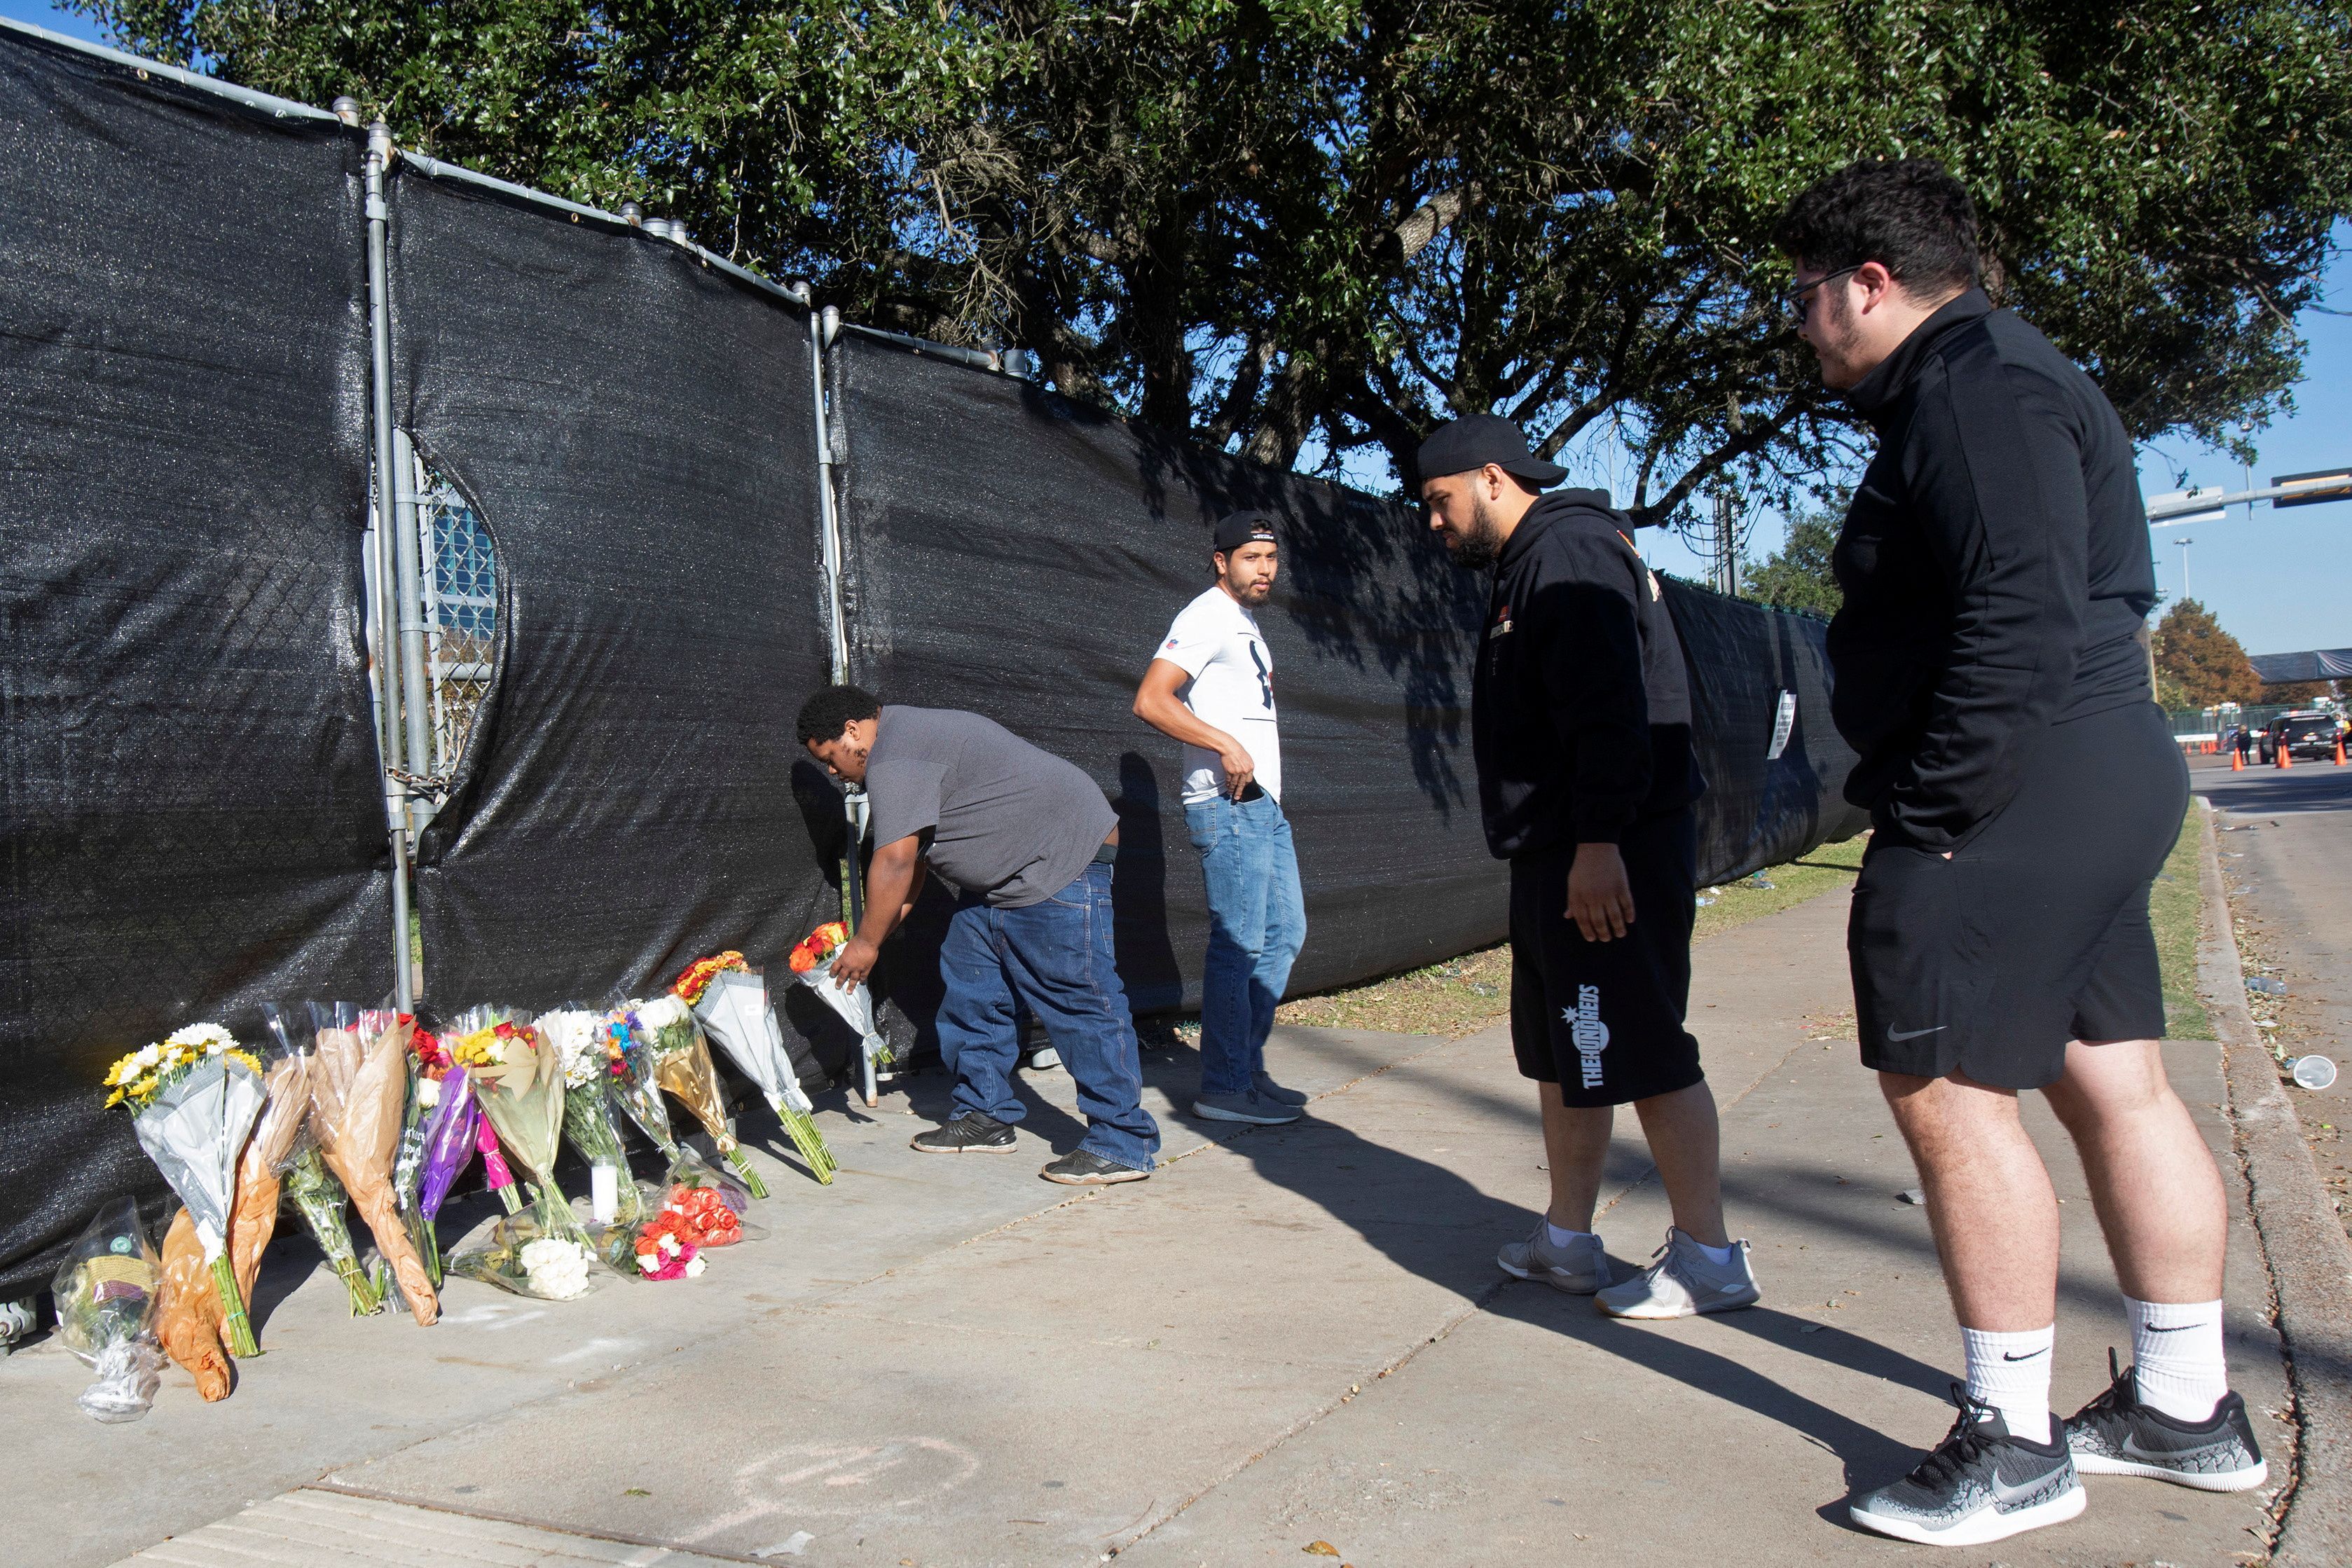 Matthew Shelton, Diego Rivera, Anthony Perez and Juan Carillo place flowers on a gate to NRG Park, after a deadly crush of fans during a performance the night before at the Astroworld Festival by rapper Travis Scott in Houston, Texas, U.S. November 6, 2021. REUTERS/Daniel Kramer